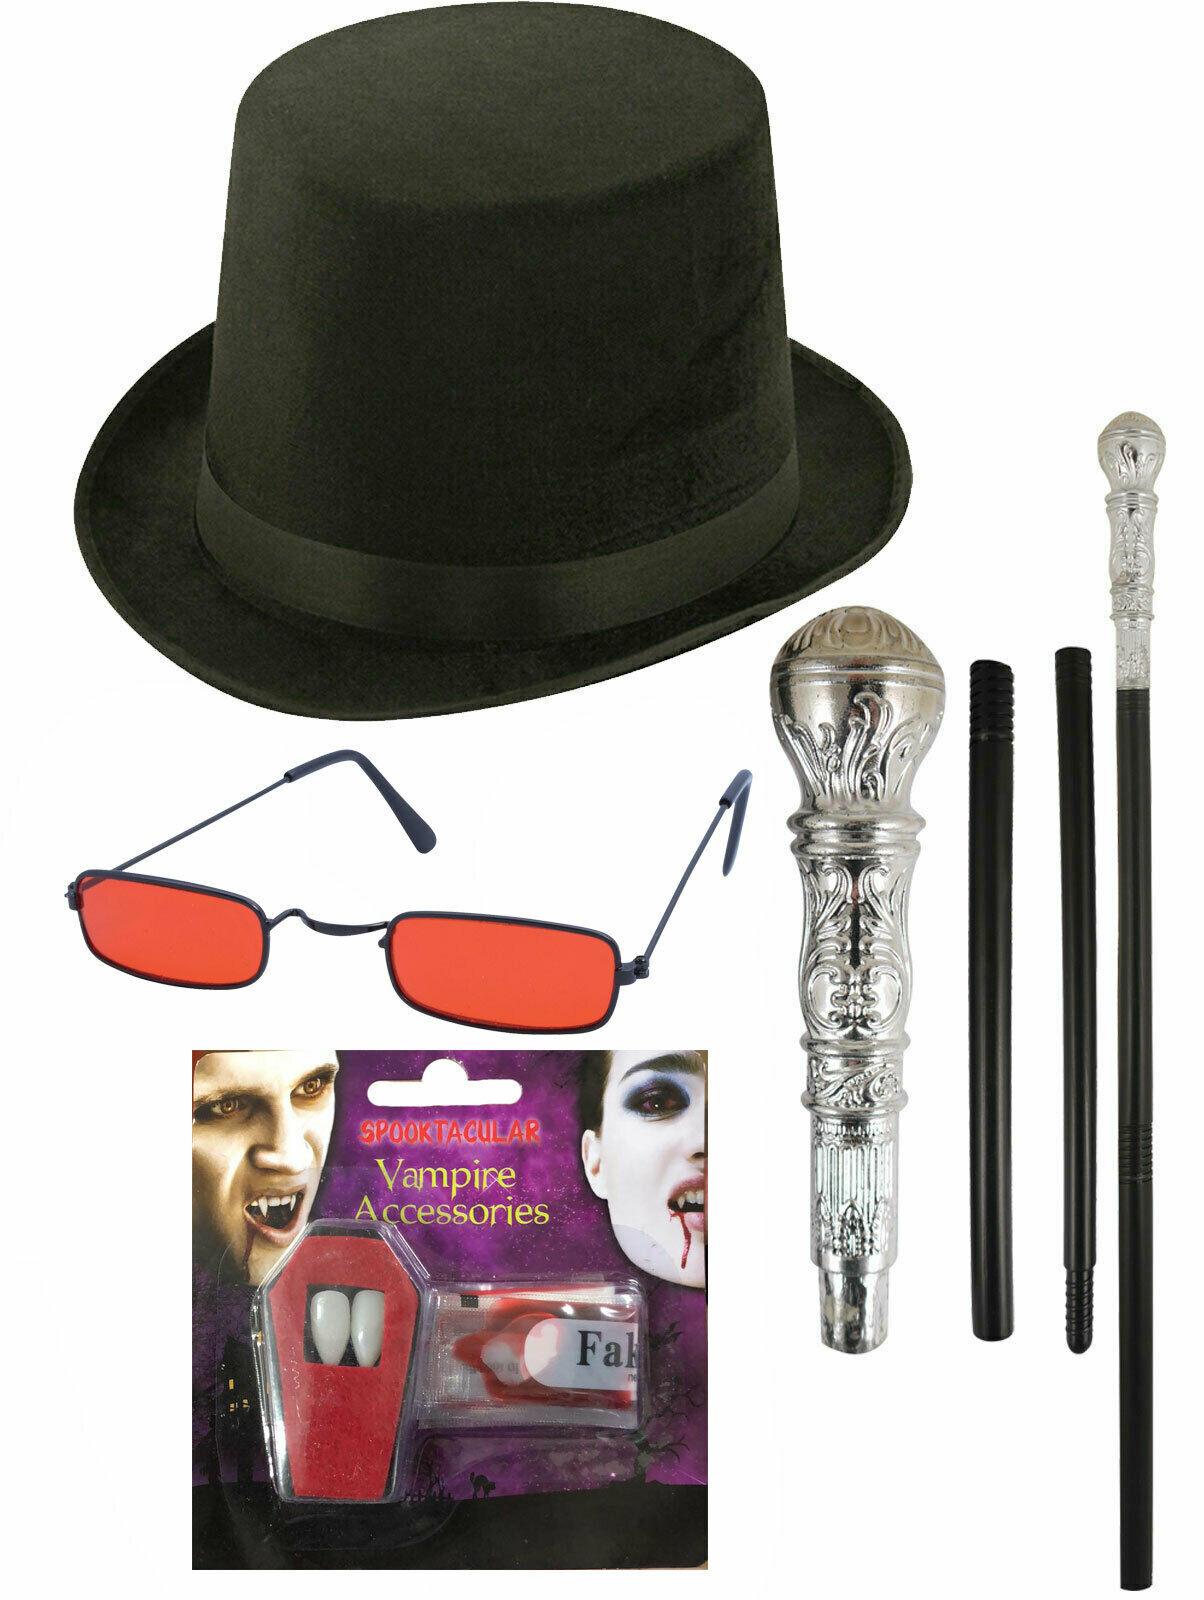 Lincoln Top Hat Dracula Glasses Silver Cane Fangs Halloween Scary Vampire Set - Labreeze